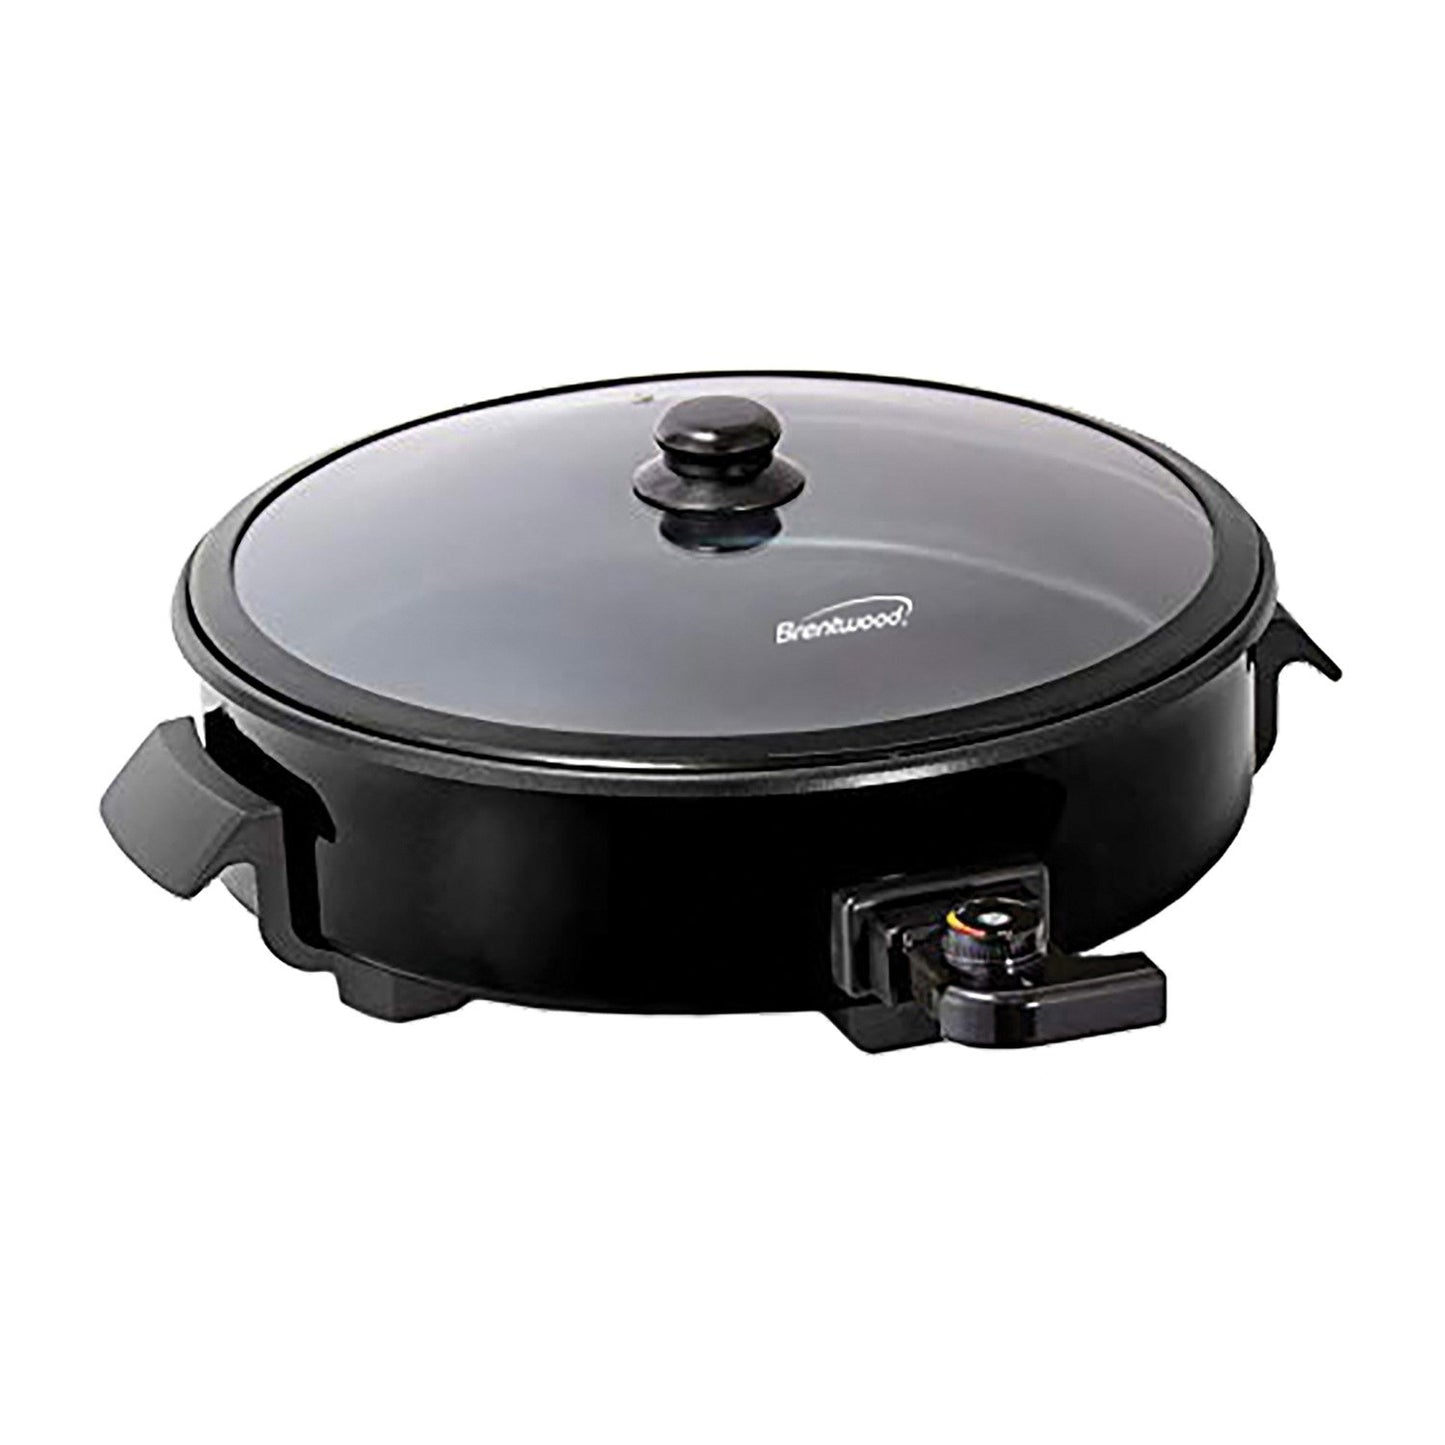 Brentwood App. SK-67BK 12" Round Nonstick Electric Skillet w/Vented Glass Lid